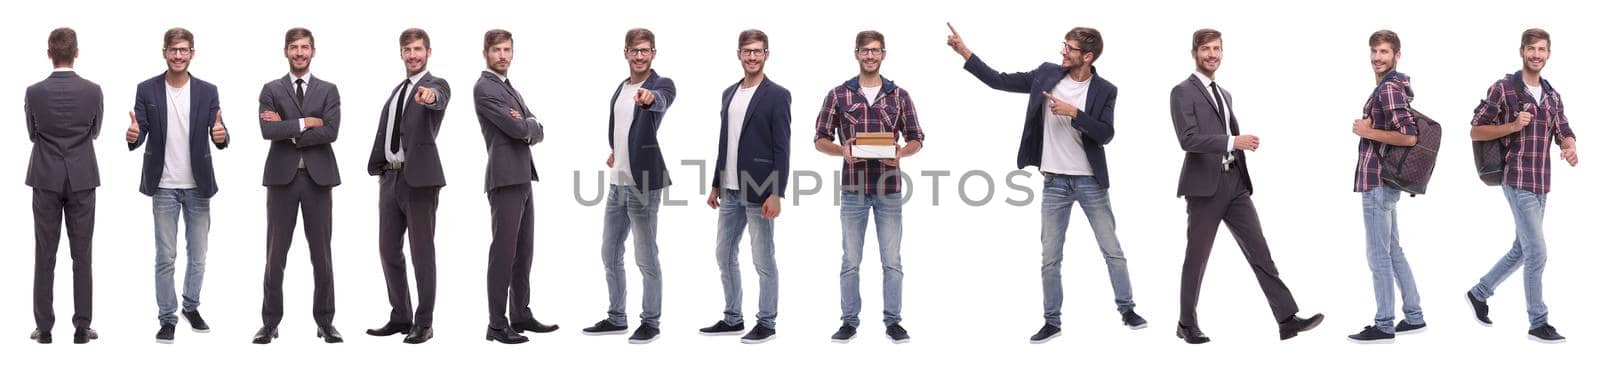 panoramic collage of self-motivated young man .isolated on white by asdf